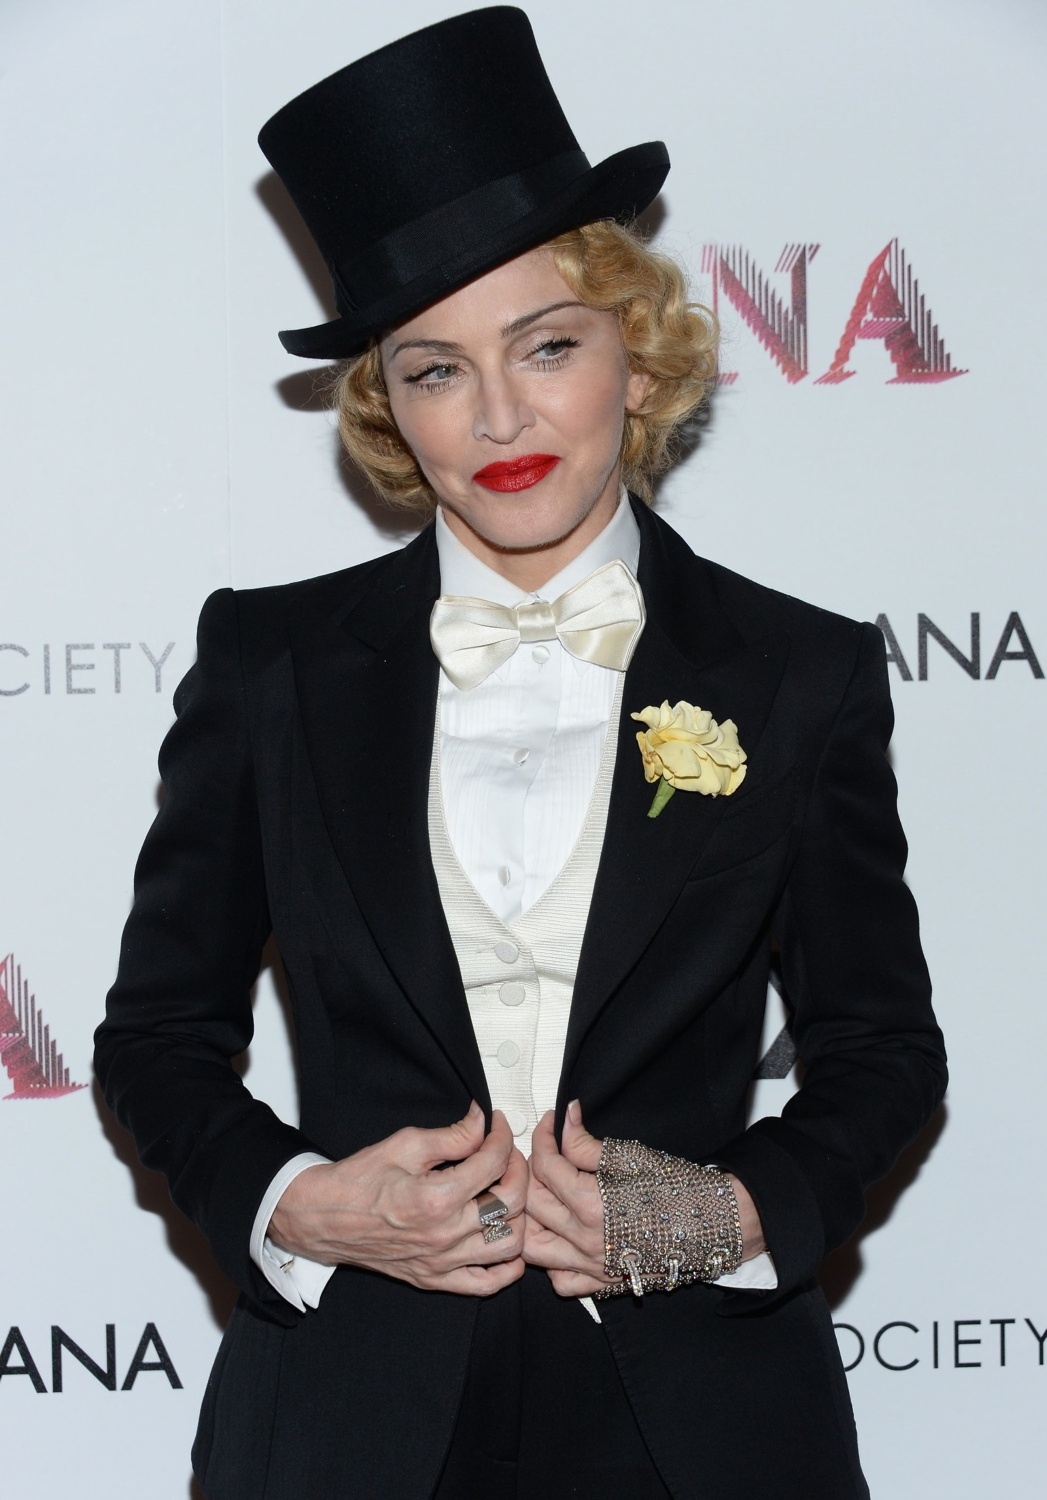 20130619-pictures-madonna-mdna-tour-premiere-screening-hq-14.jpg